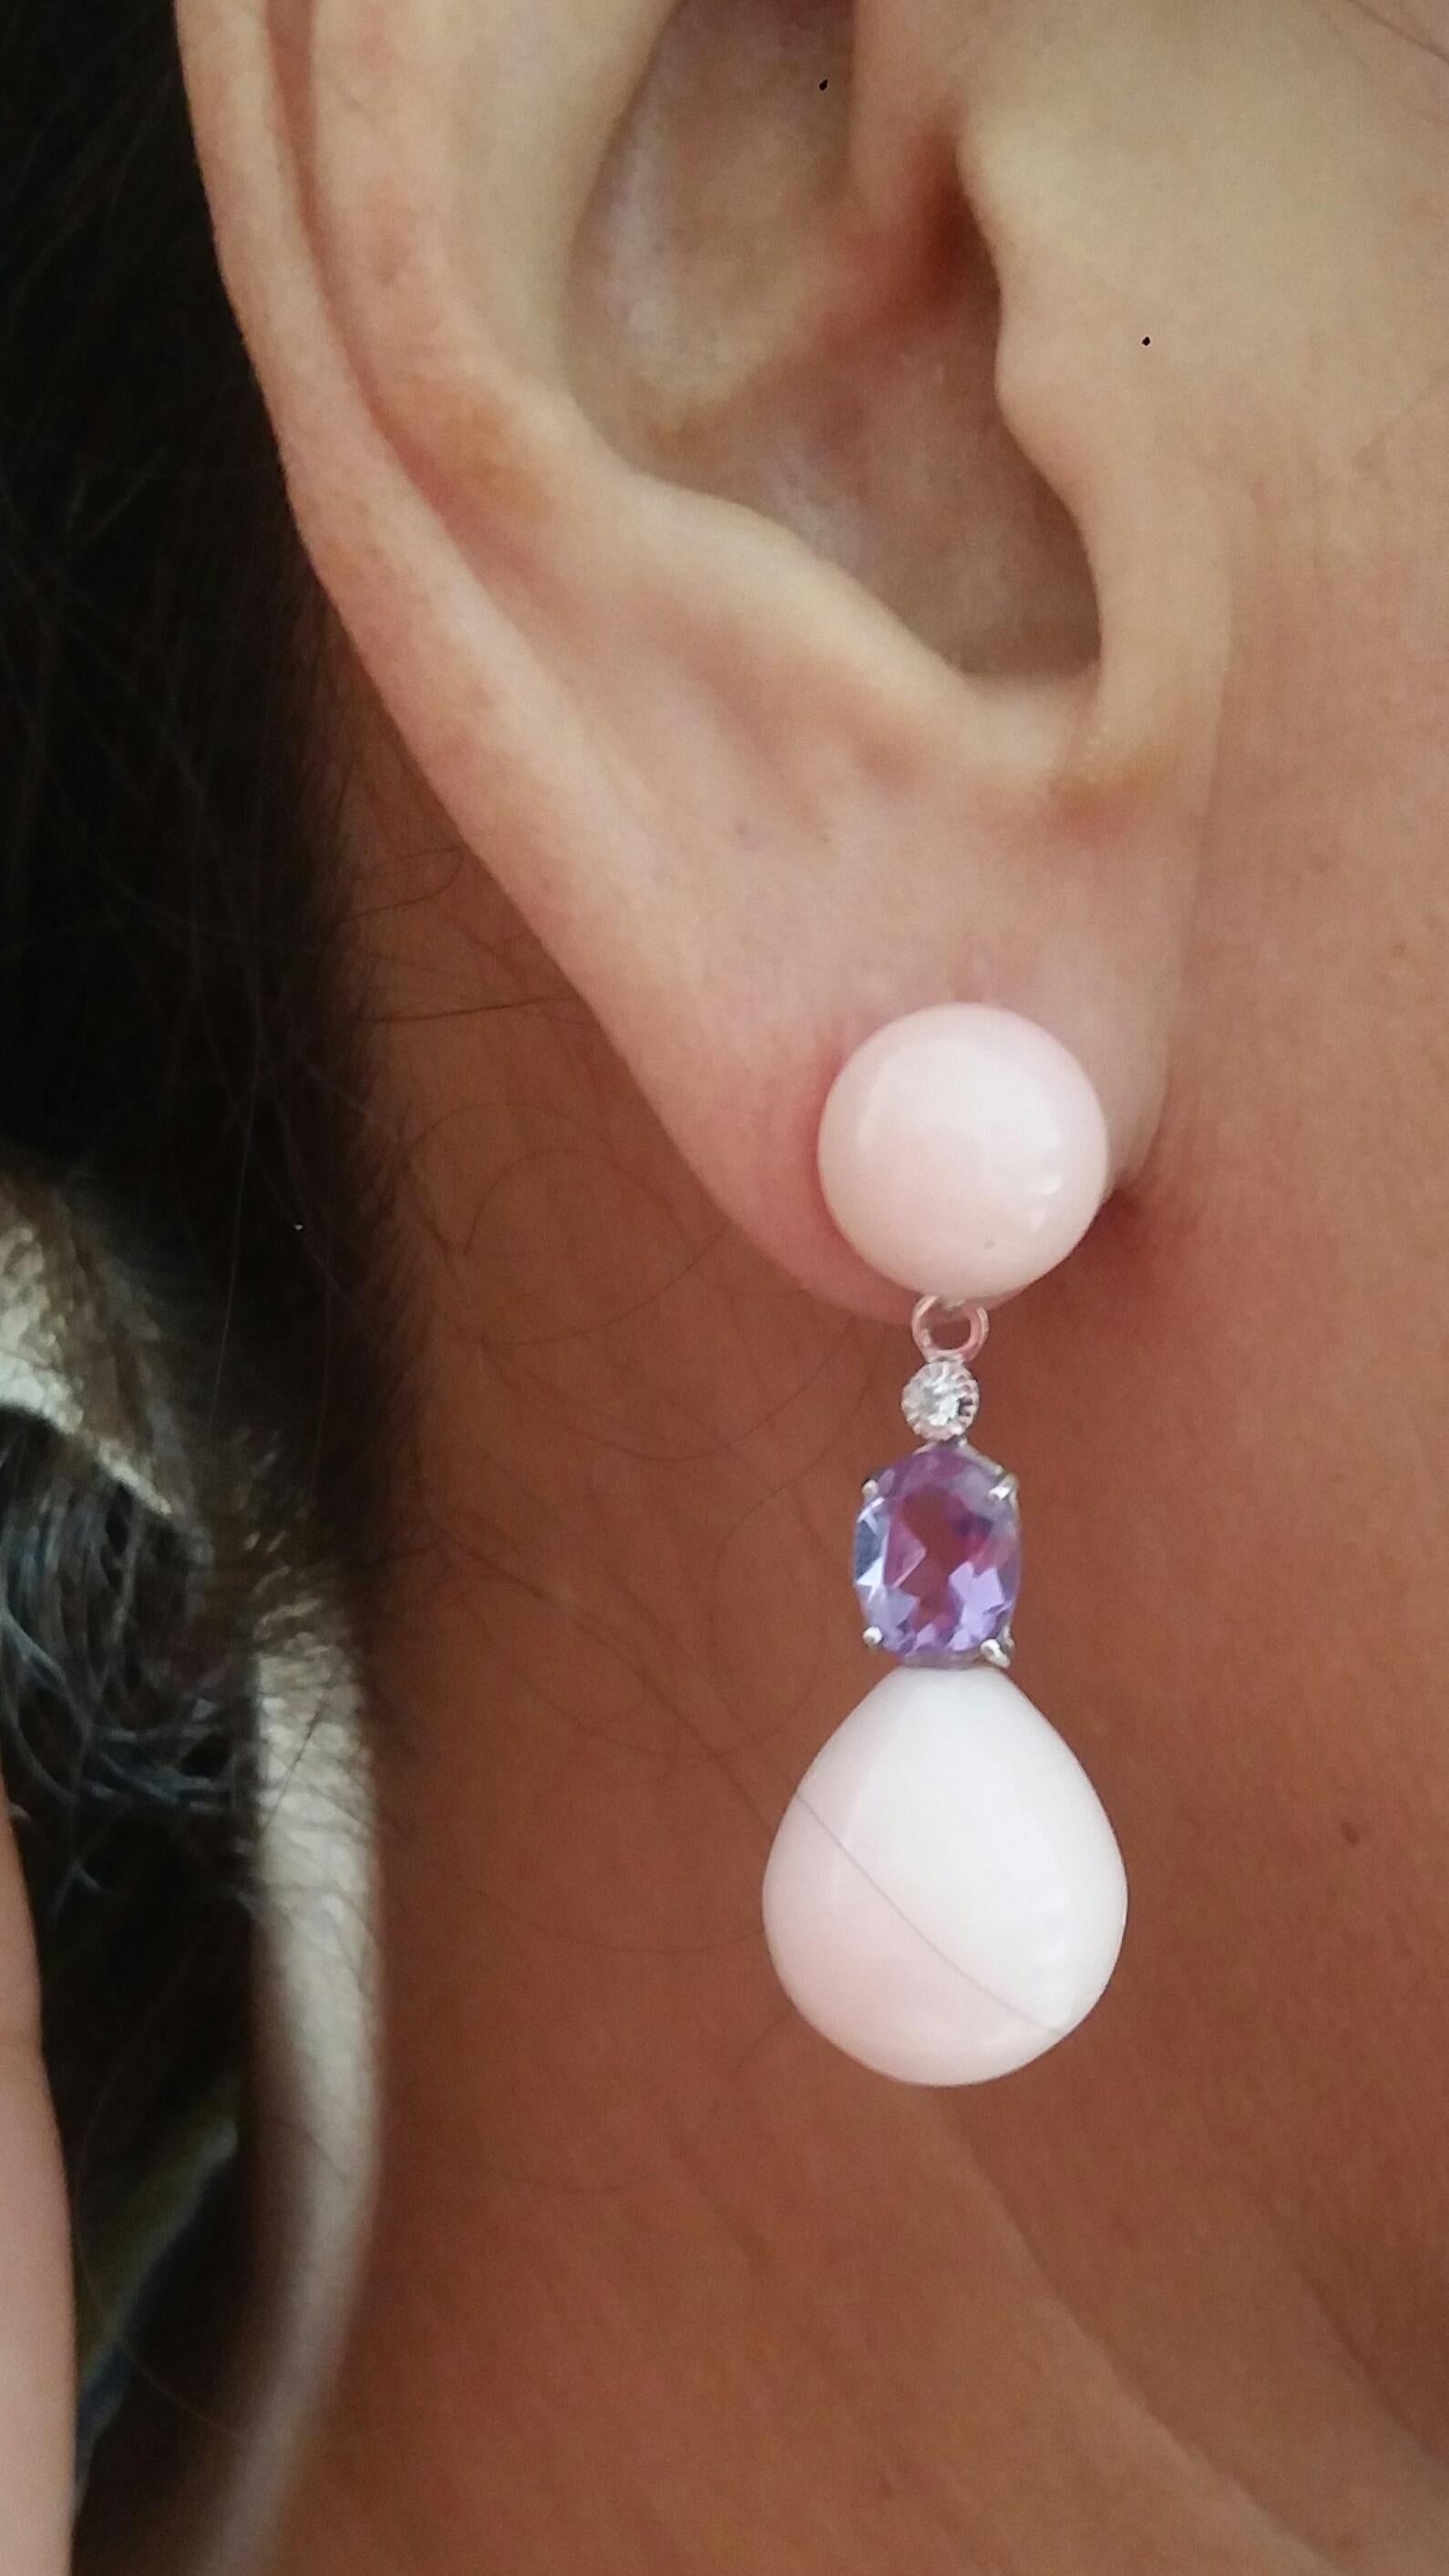 Tops are 2 Pink Opal round cabochon,then 2 oval faceted Amethyst and full cut round Diamonds set in White Gold are holding 2 Pink Opal round Drops.

In 1978 our workshop started in Italy to make simple-chic Art Deco style jewellery, completely